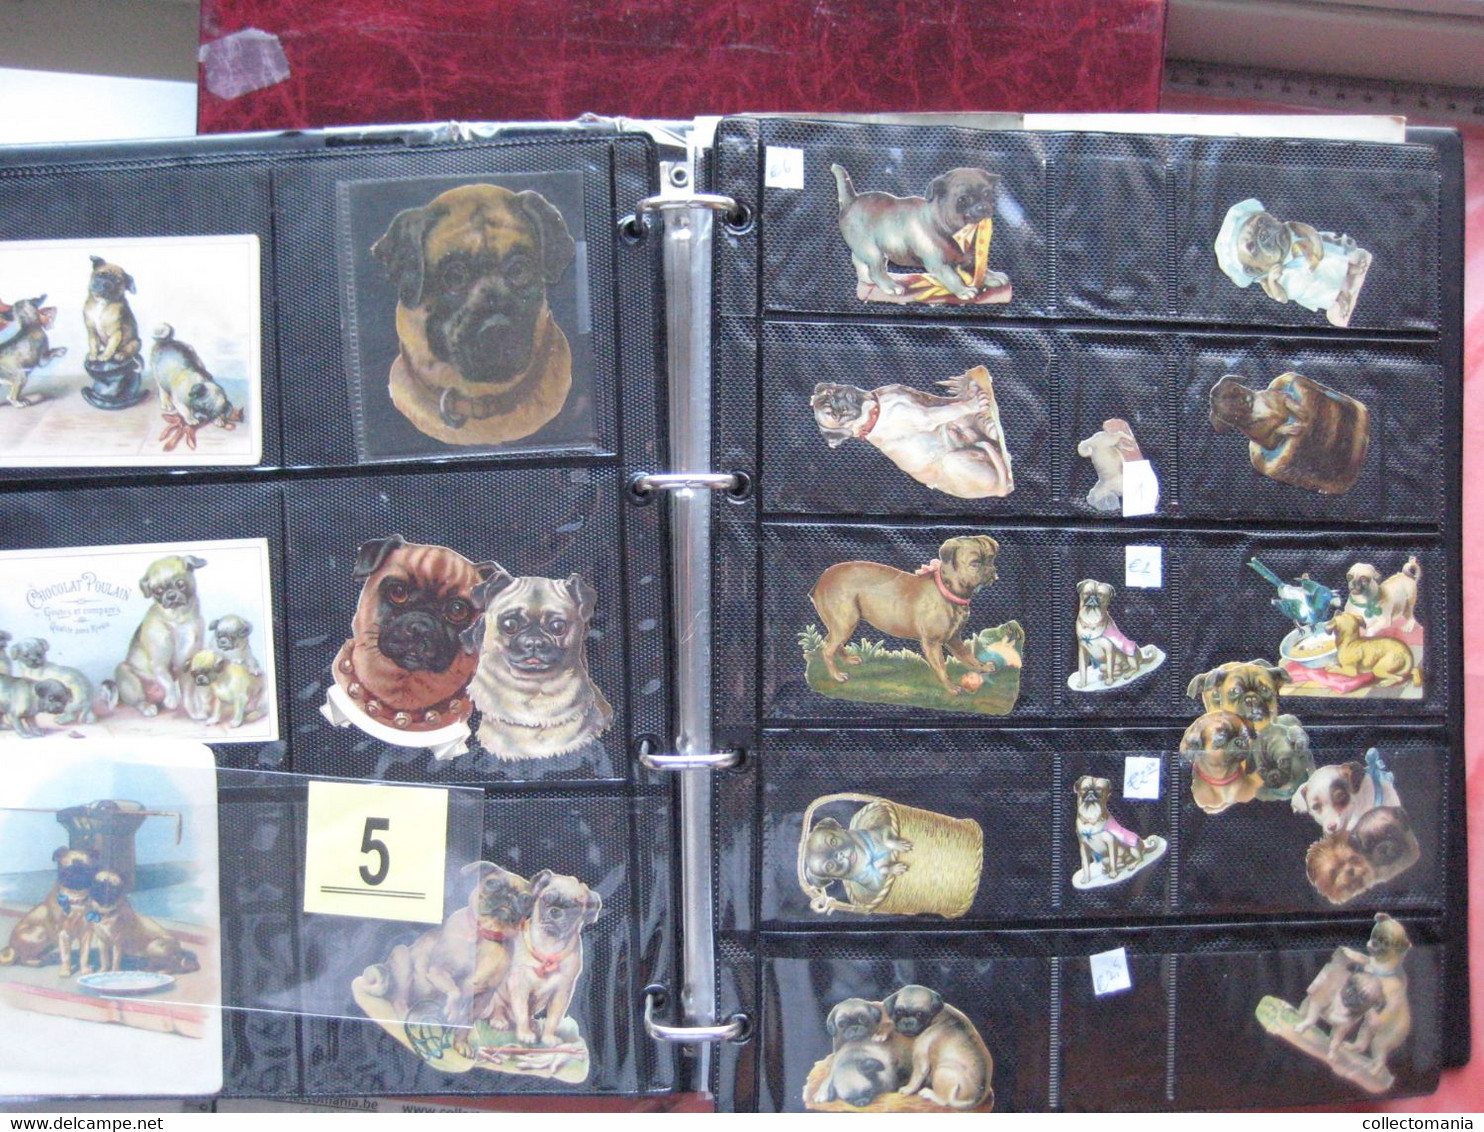 19th century each chromo fotograped (count yourself ) SCRAPS_MAP11_dogs, Mops,Teckel,Windhond GLANS BILDER